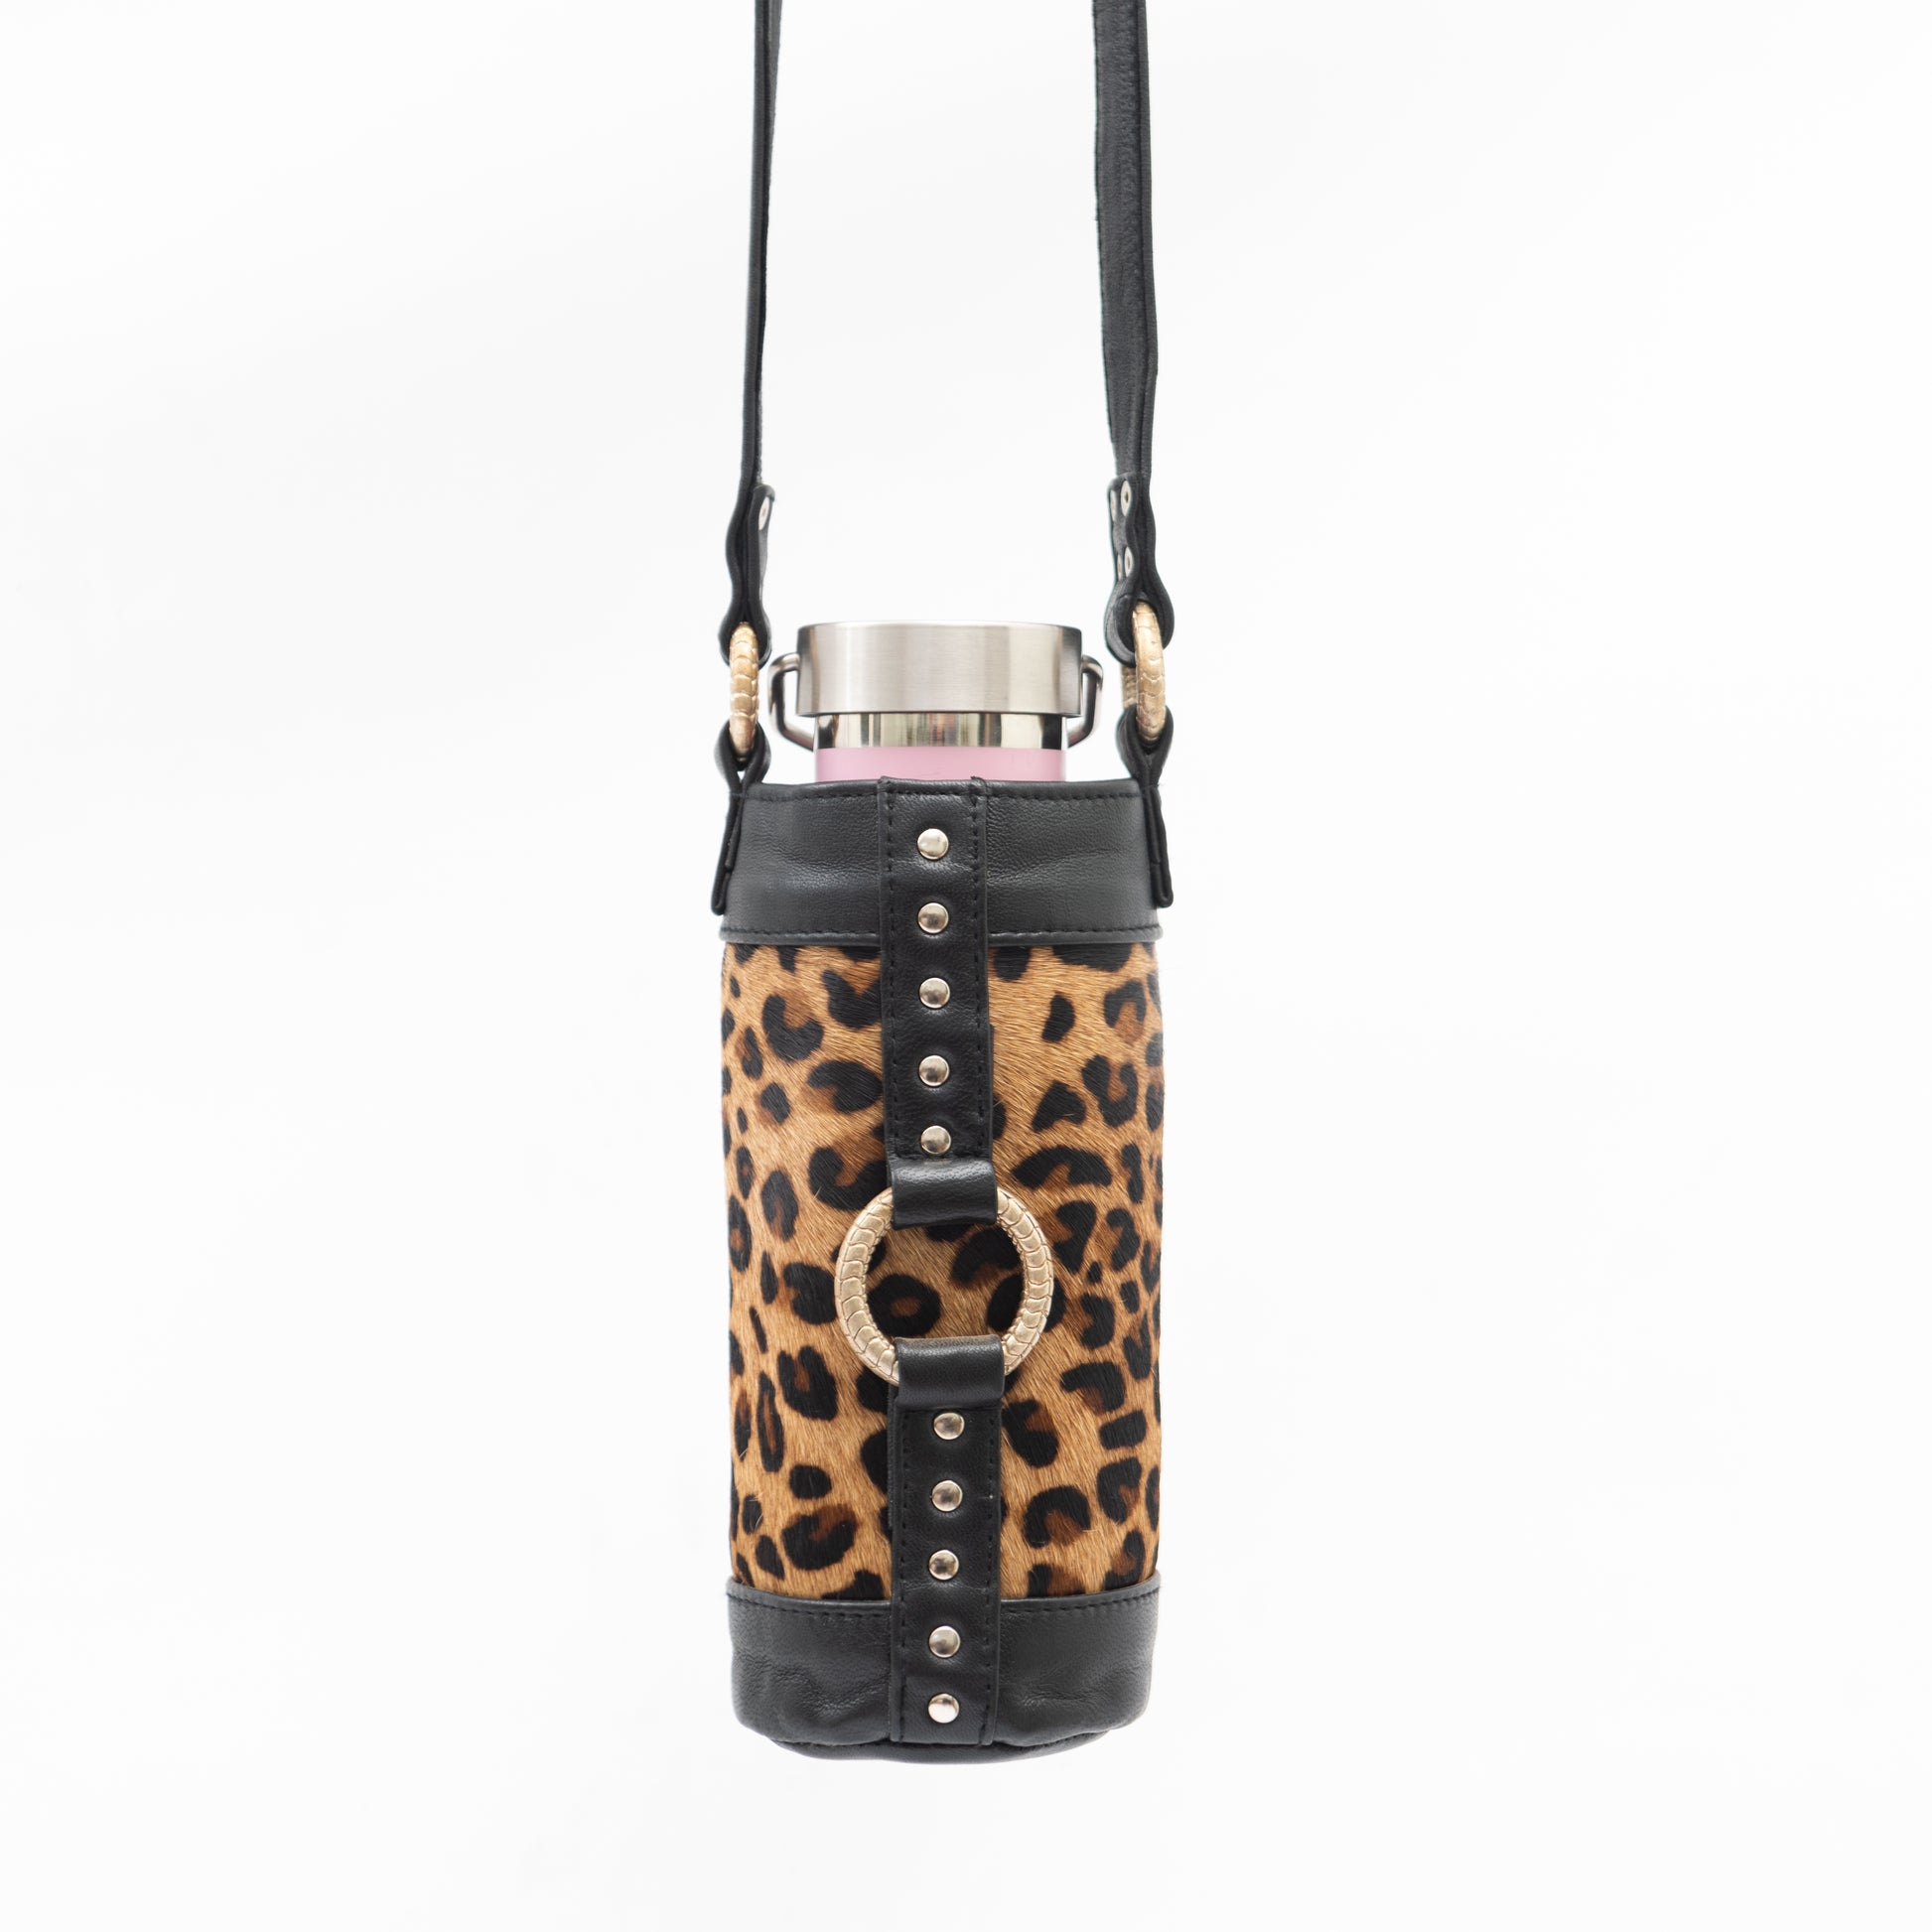 Ziji The Label, hand made black leather and leopard print bottle bag, holster, carry bag, reusable water bottle or wine bottle, festivals, events, dance parties, rave, travel, hiking, shopping, silver hardware and luxe silver rings.